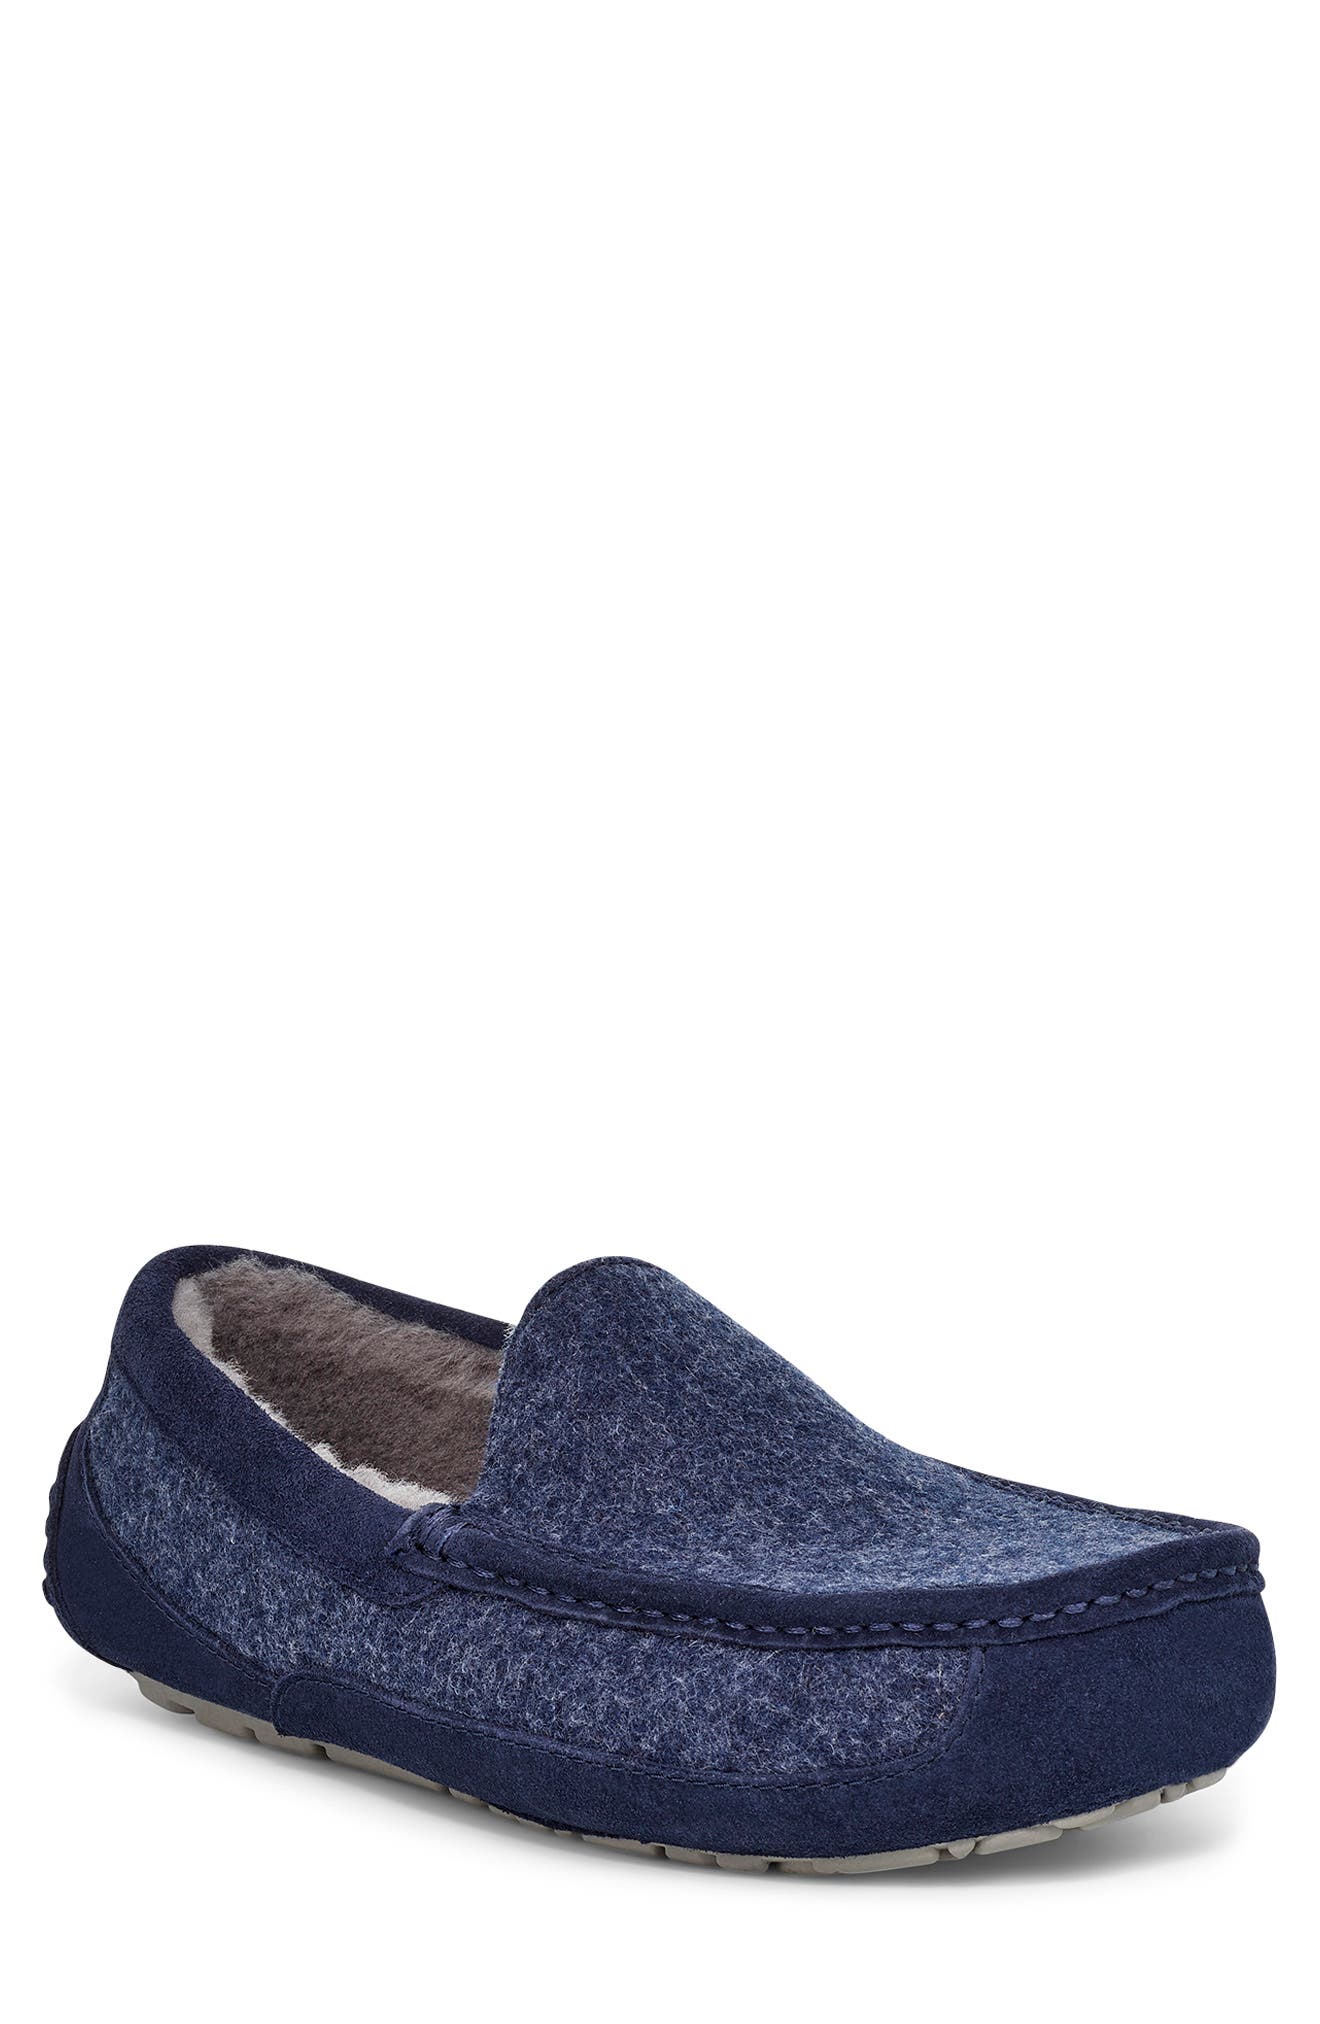 where to buy mens slippers near me